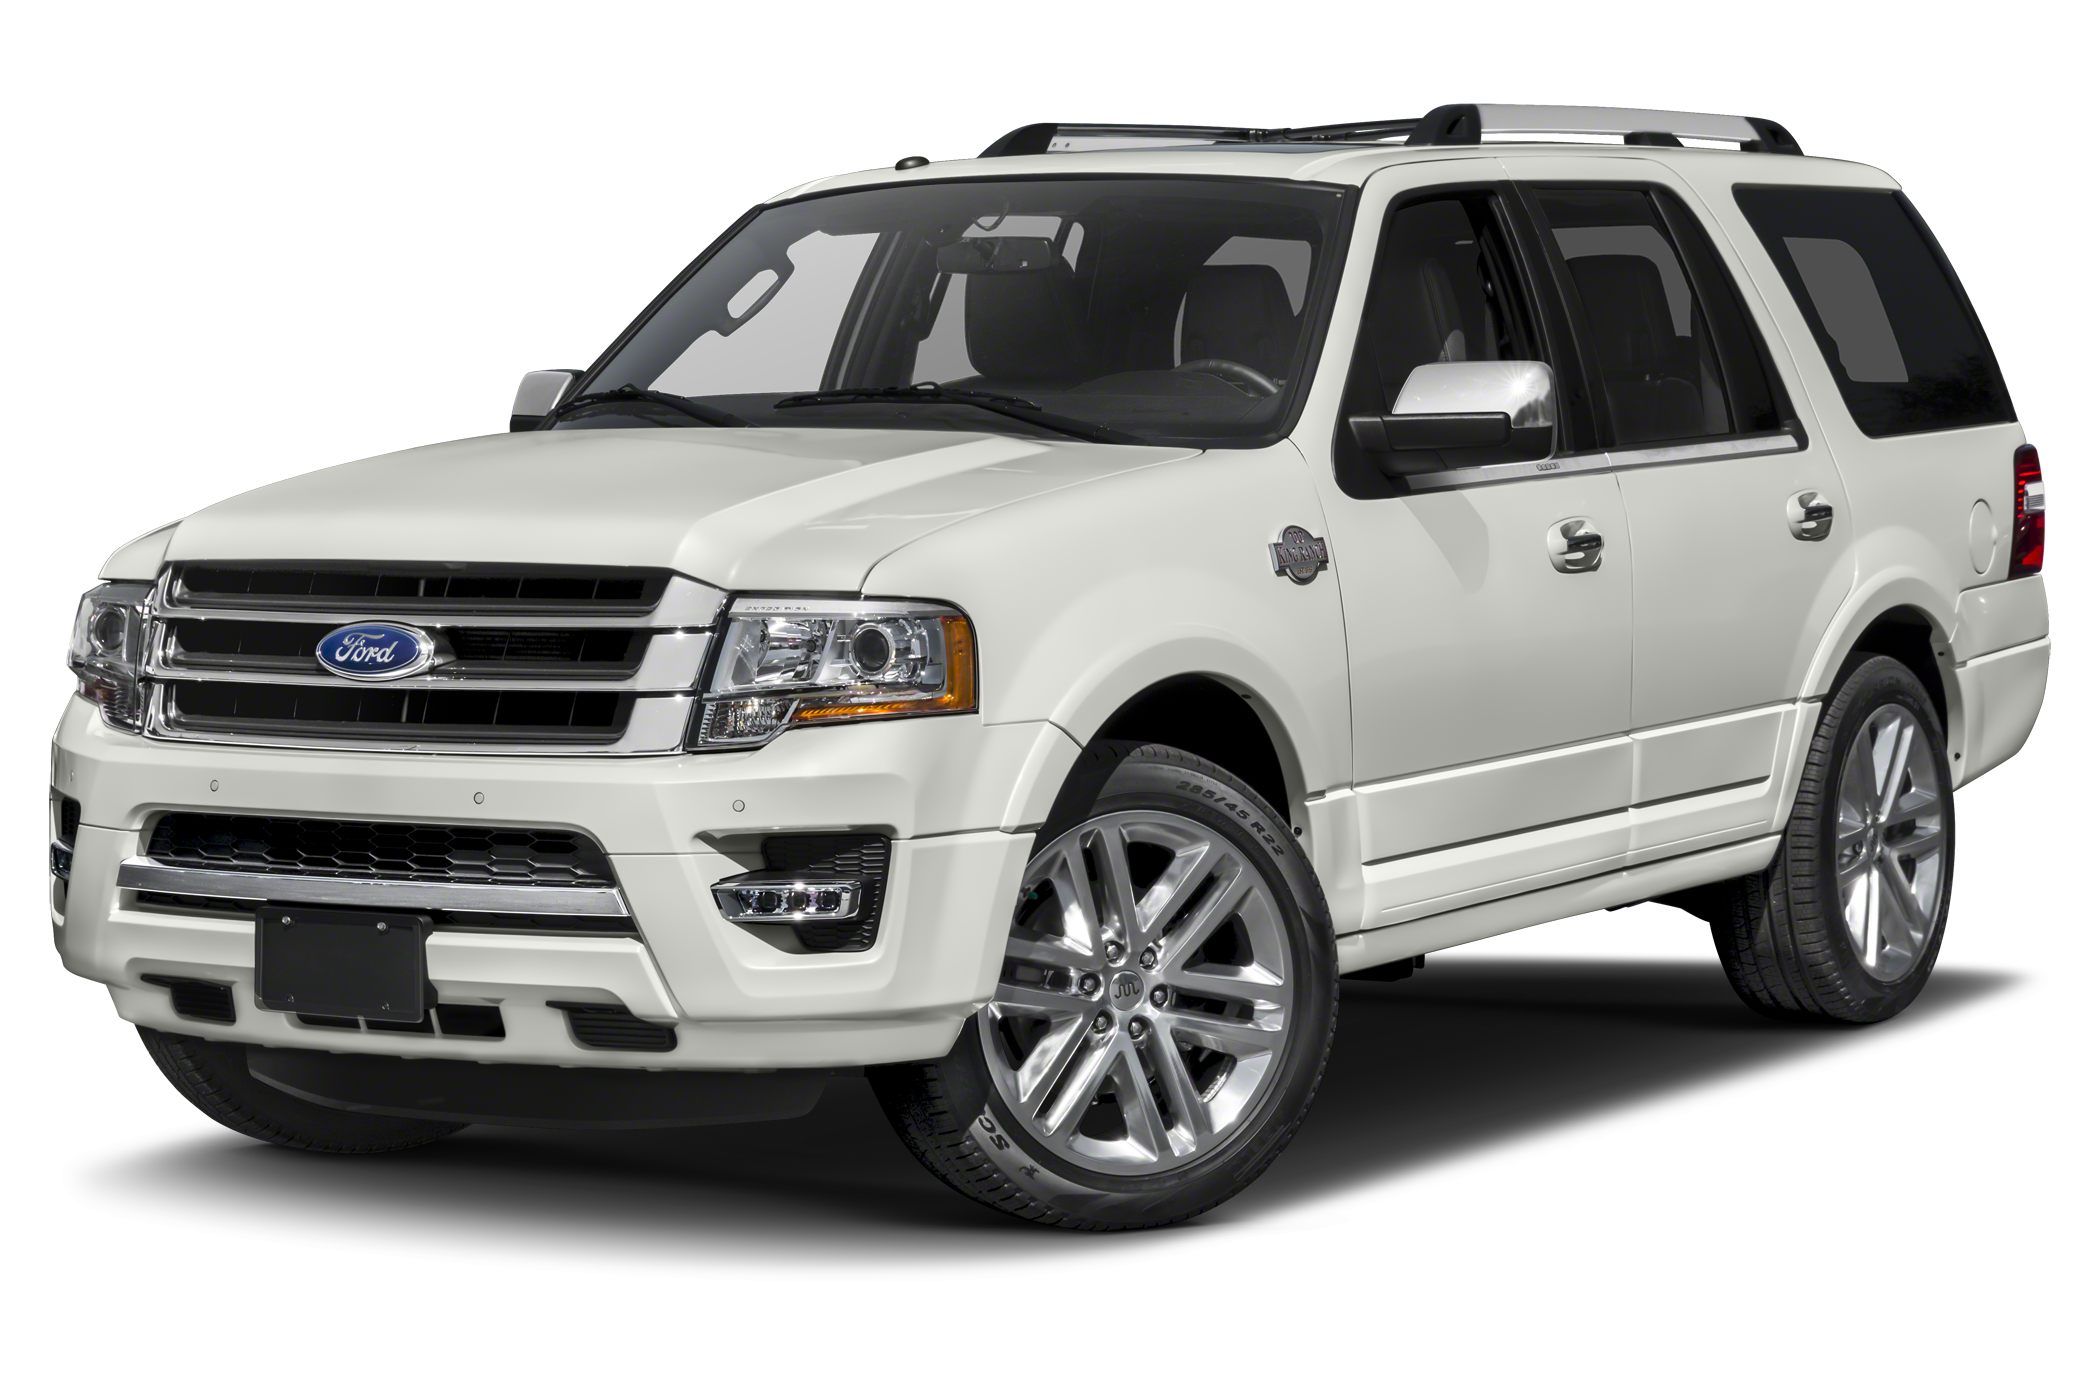 2016 Ford Expedition King Ranch 4dr 4x4 Pictures